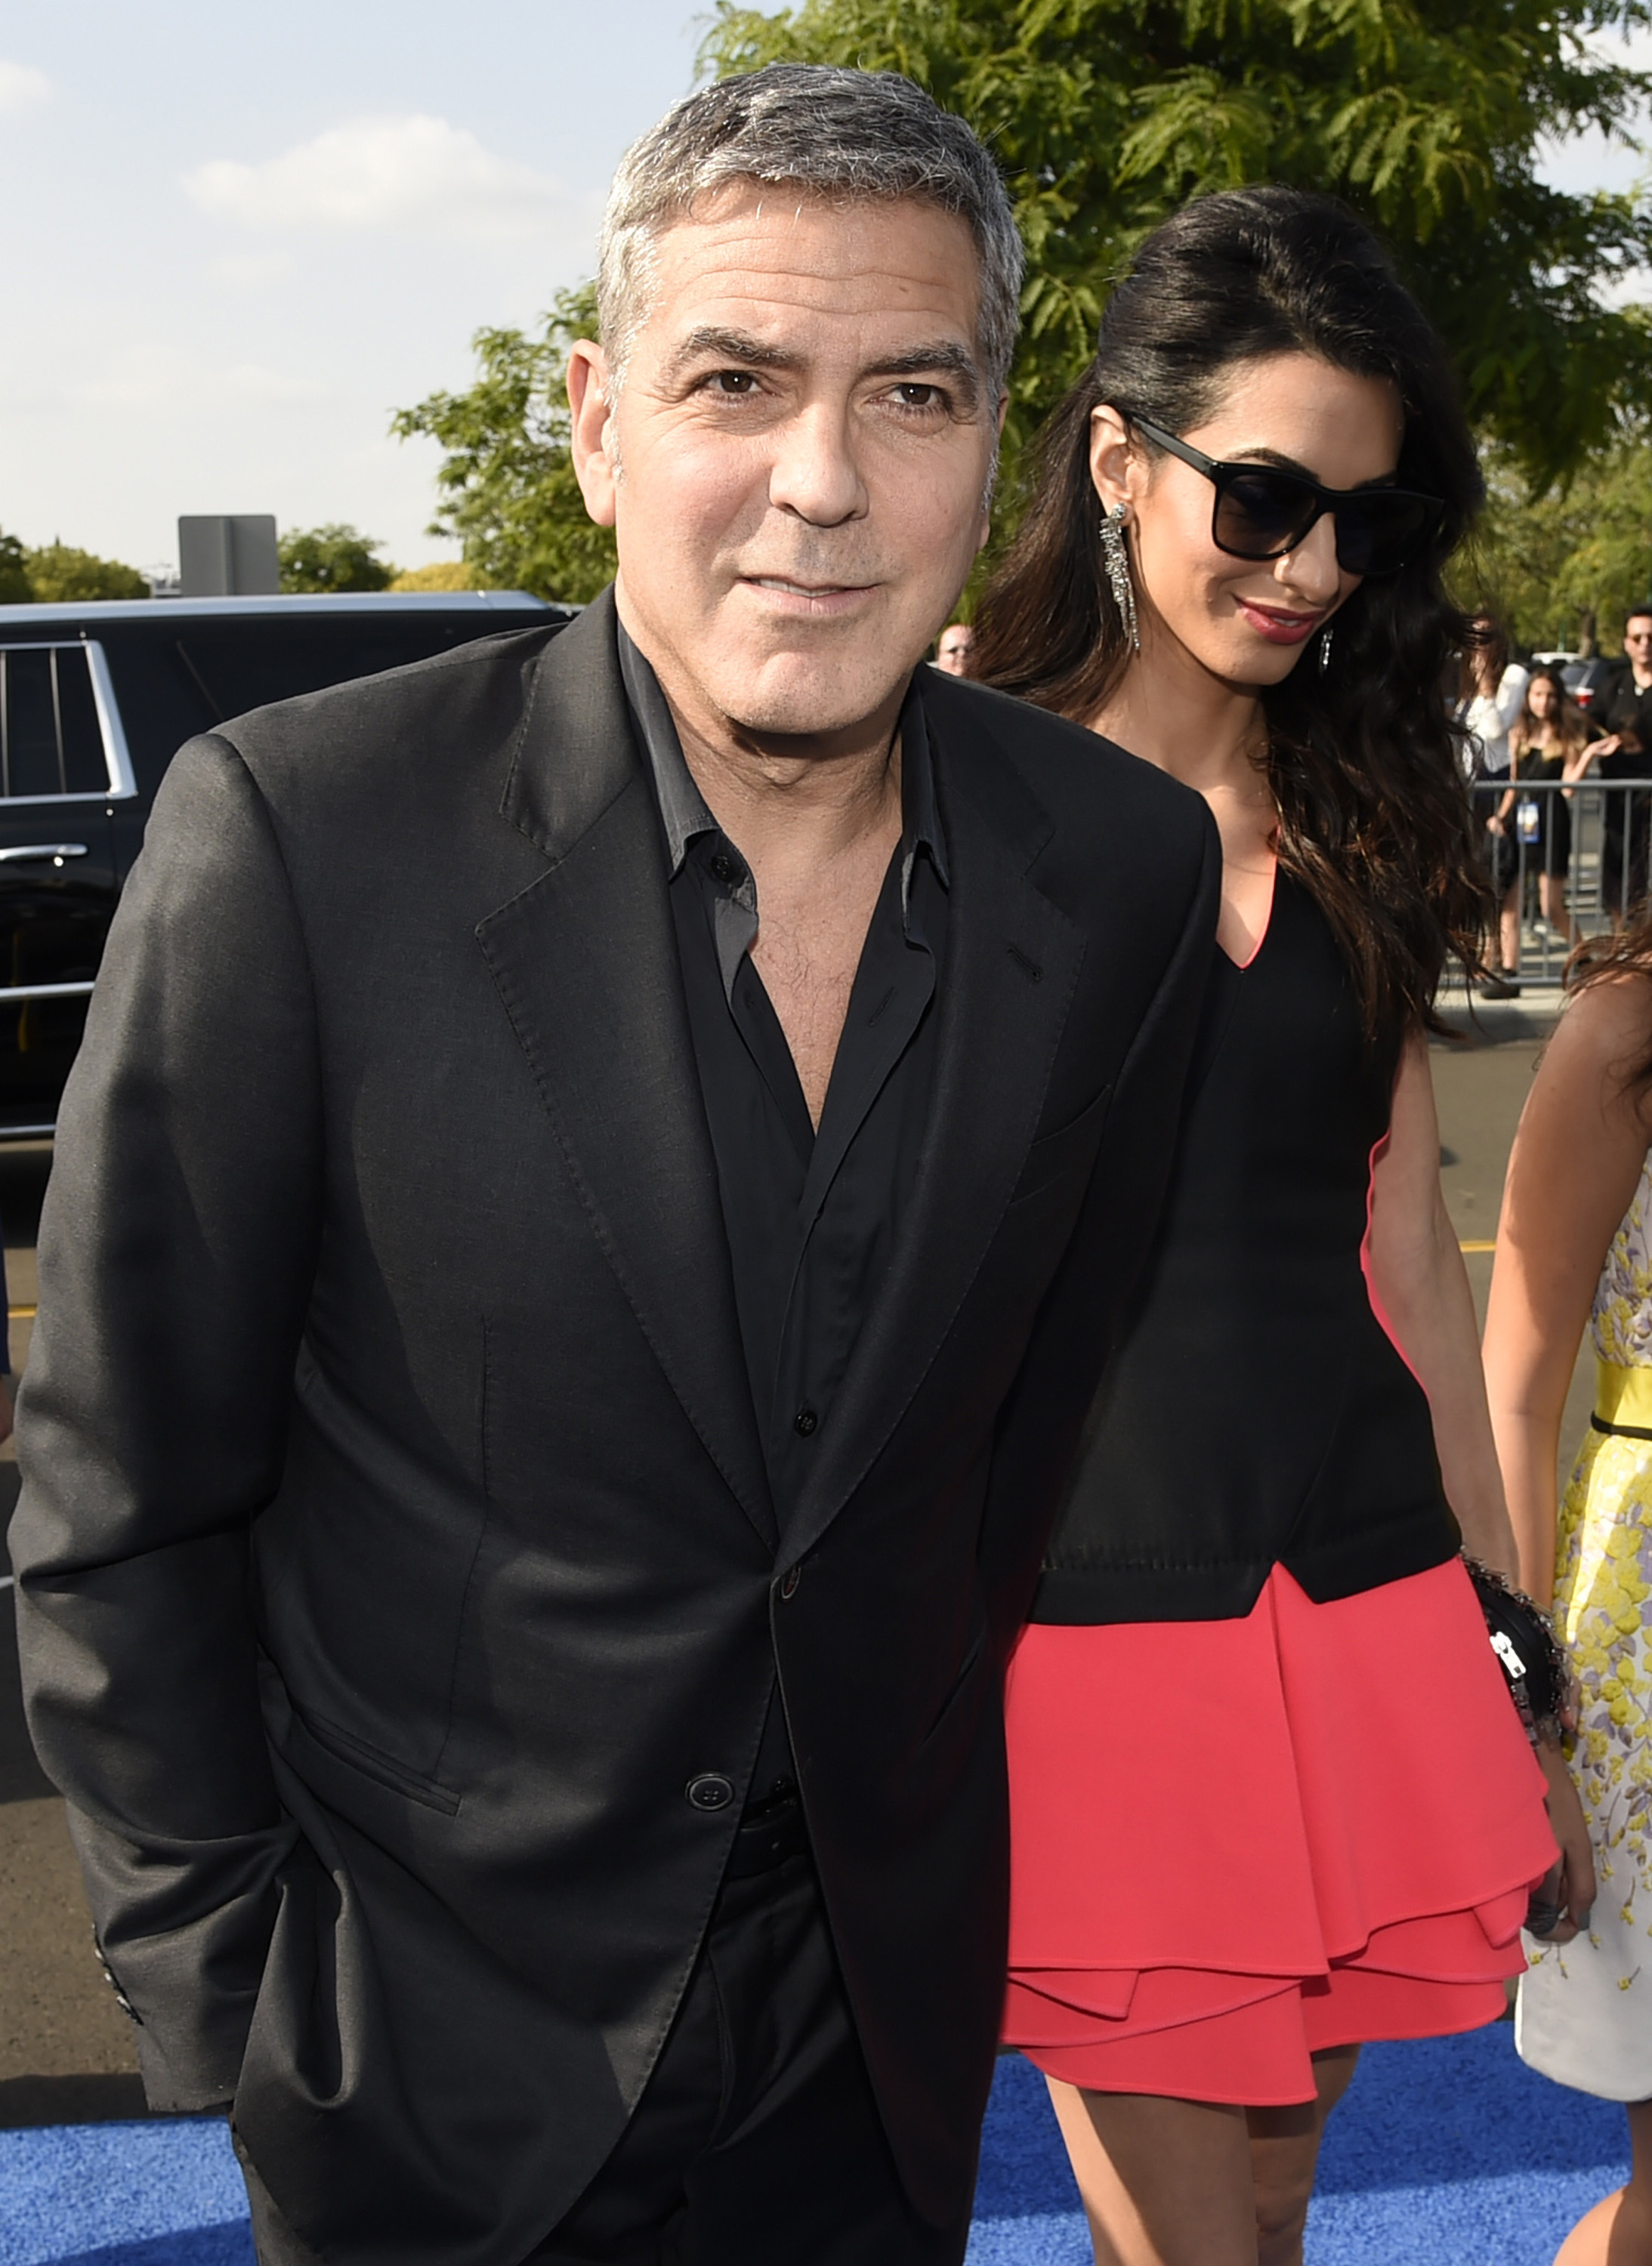 George Clooney and Amal Clooney arrive at the world premiere of "Tomorrowland" at AMC Downtown Disney on May 9, 2015, in Anaheim, Calif.